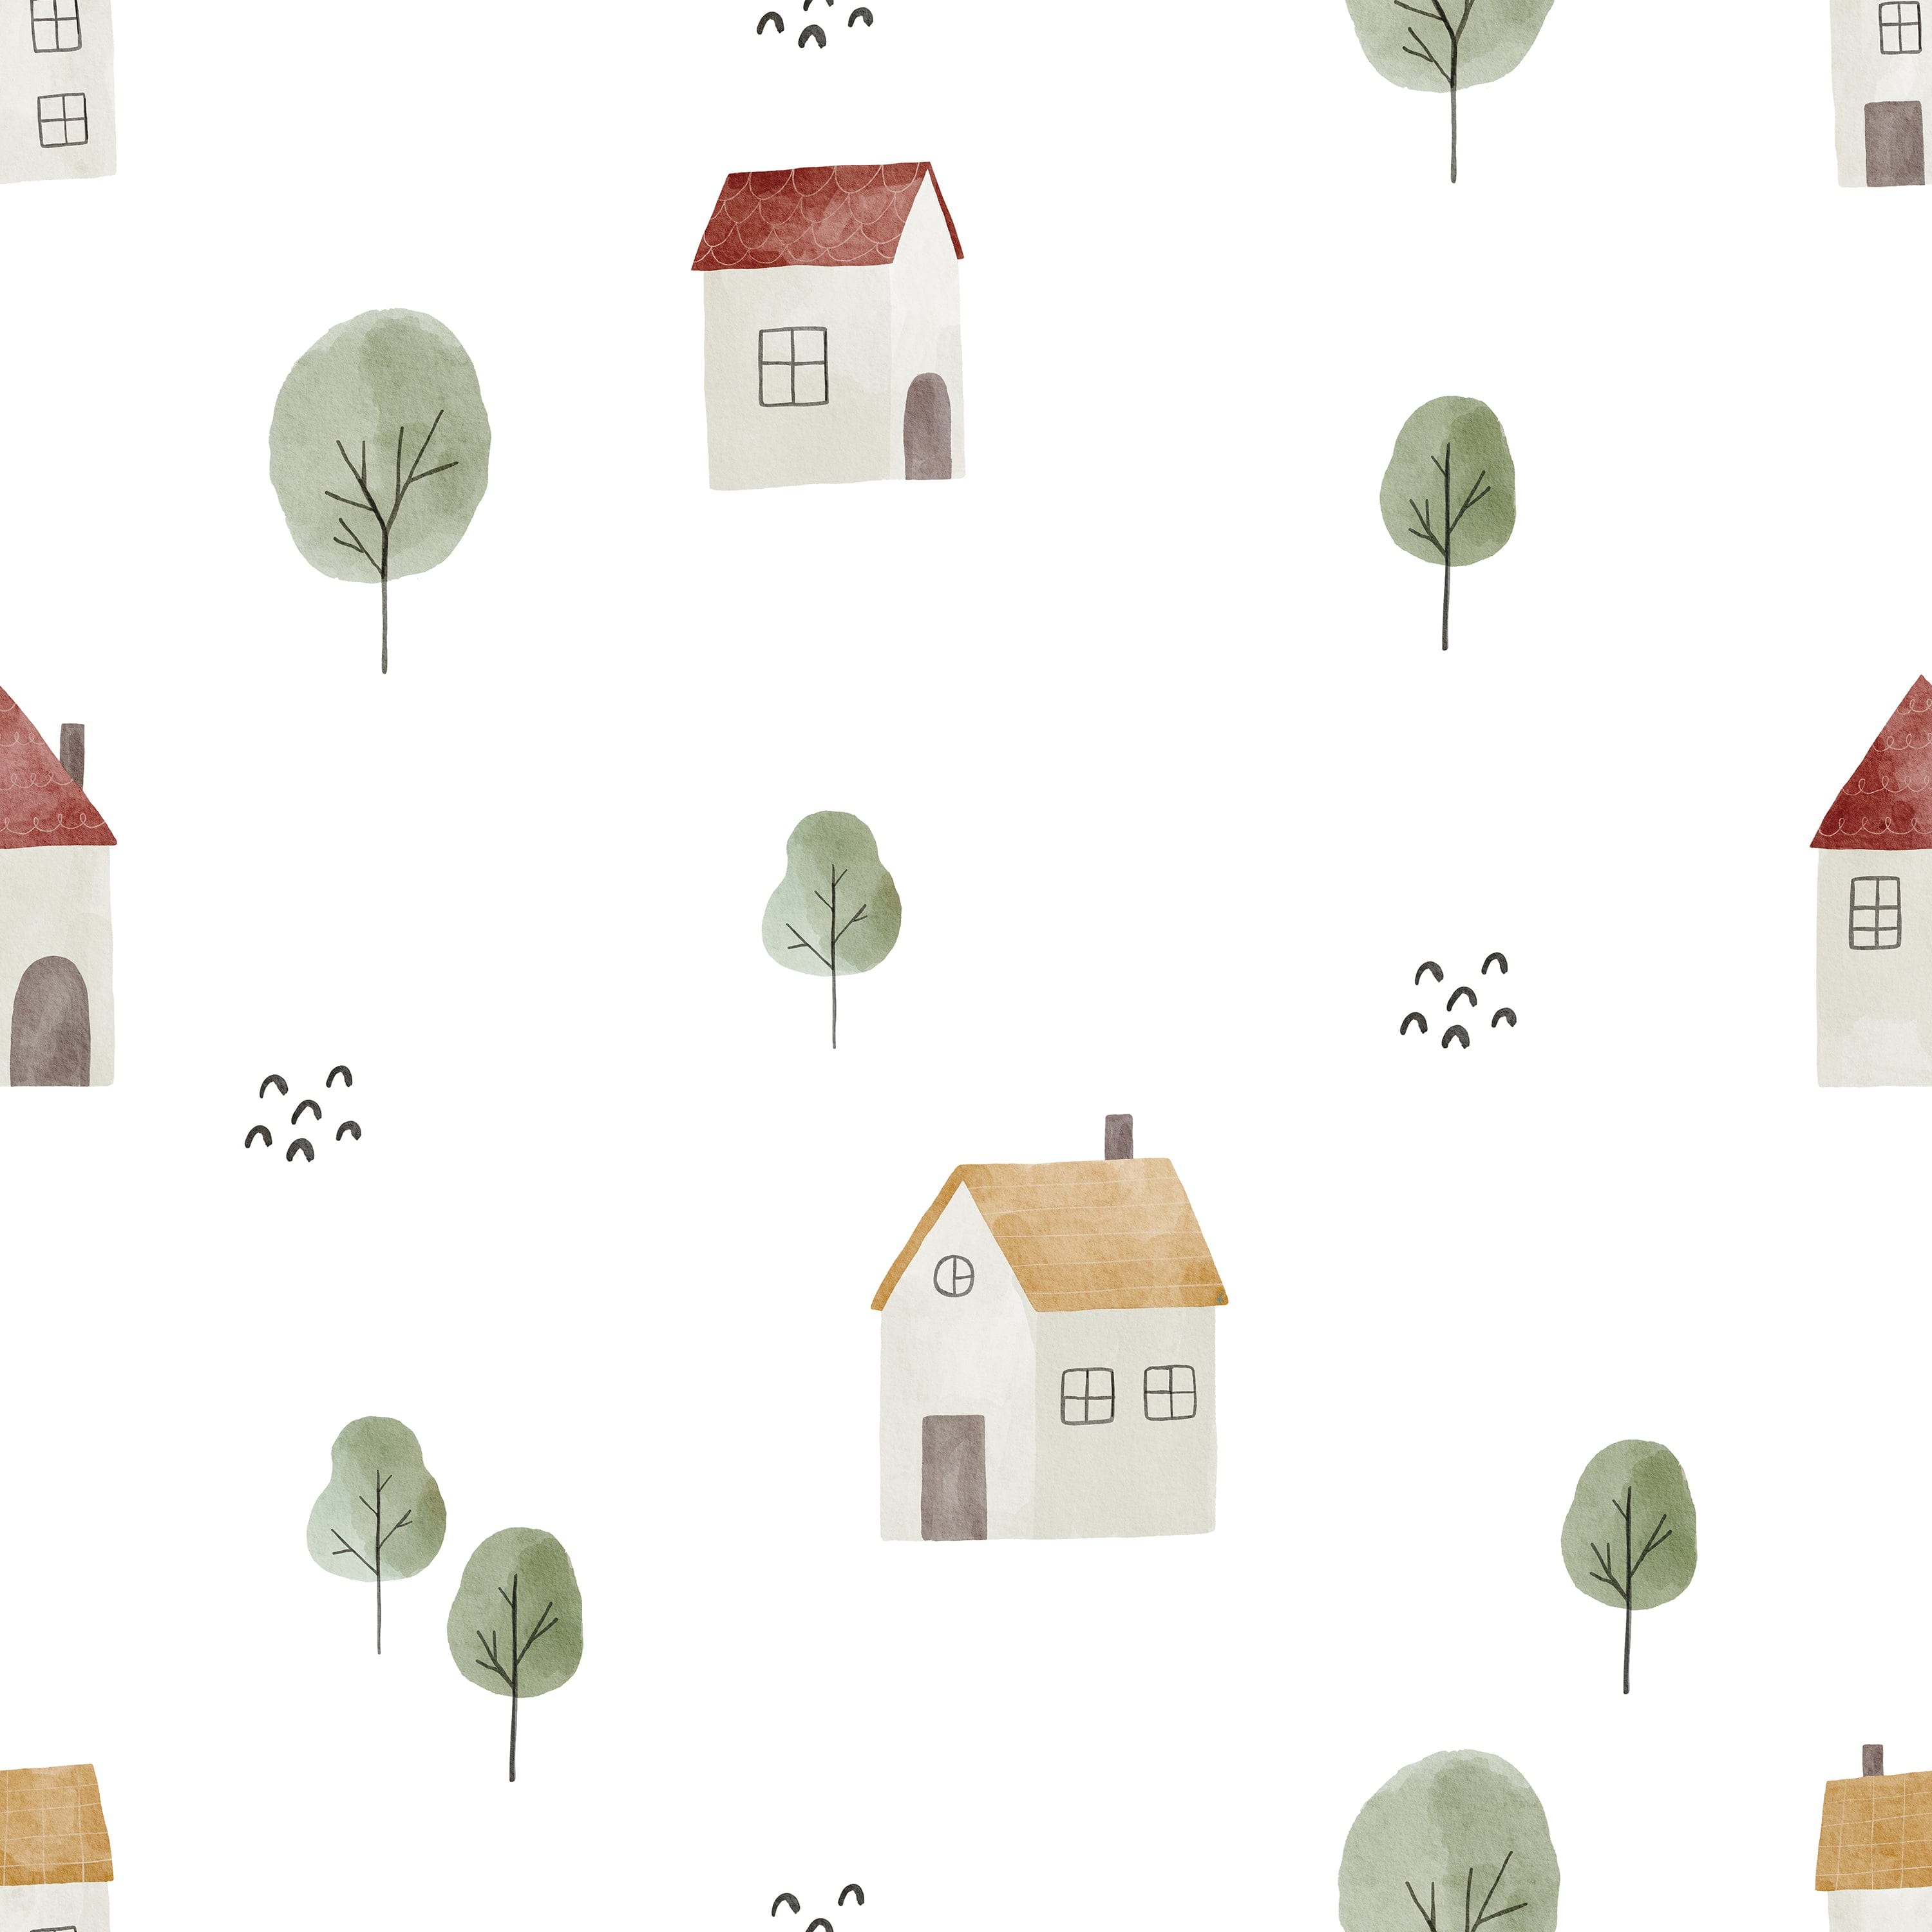 A seamless pattern of Farm Friend Wallpaper - Happy House, showcasing cute, hand-drawn houses with red and yellow roofs, surrounded by green trees and little birds, on a white background.